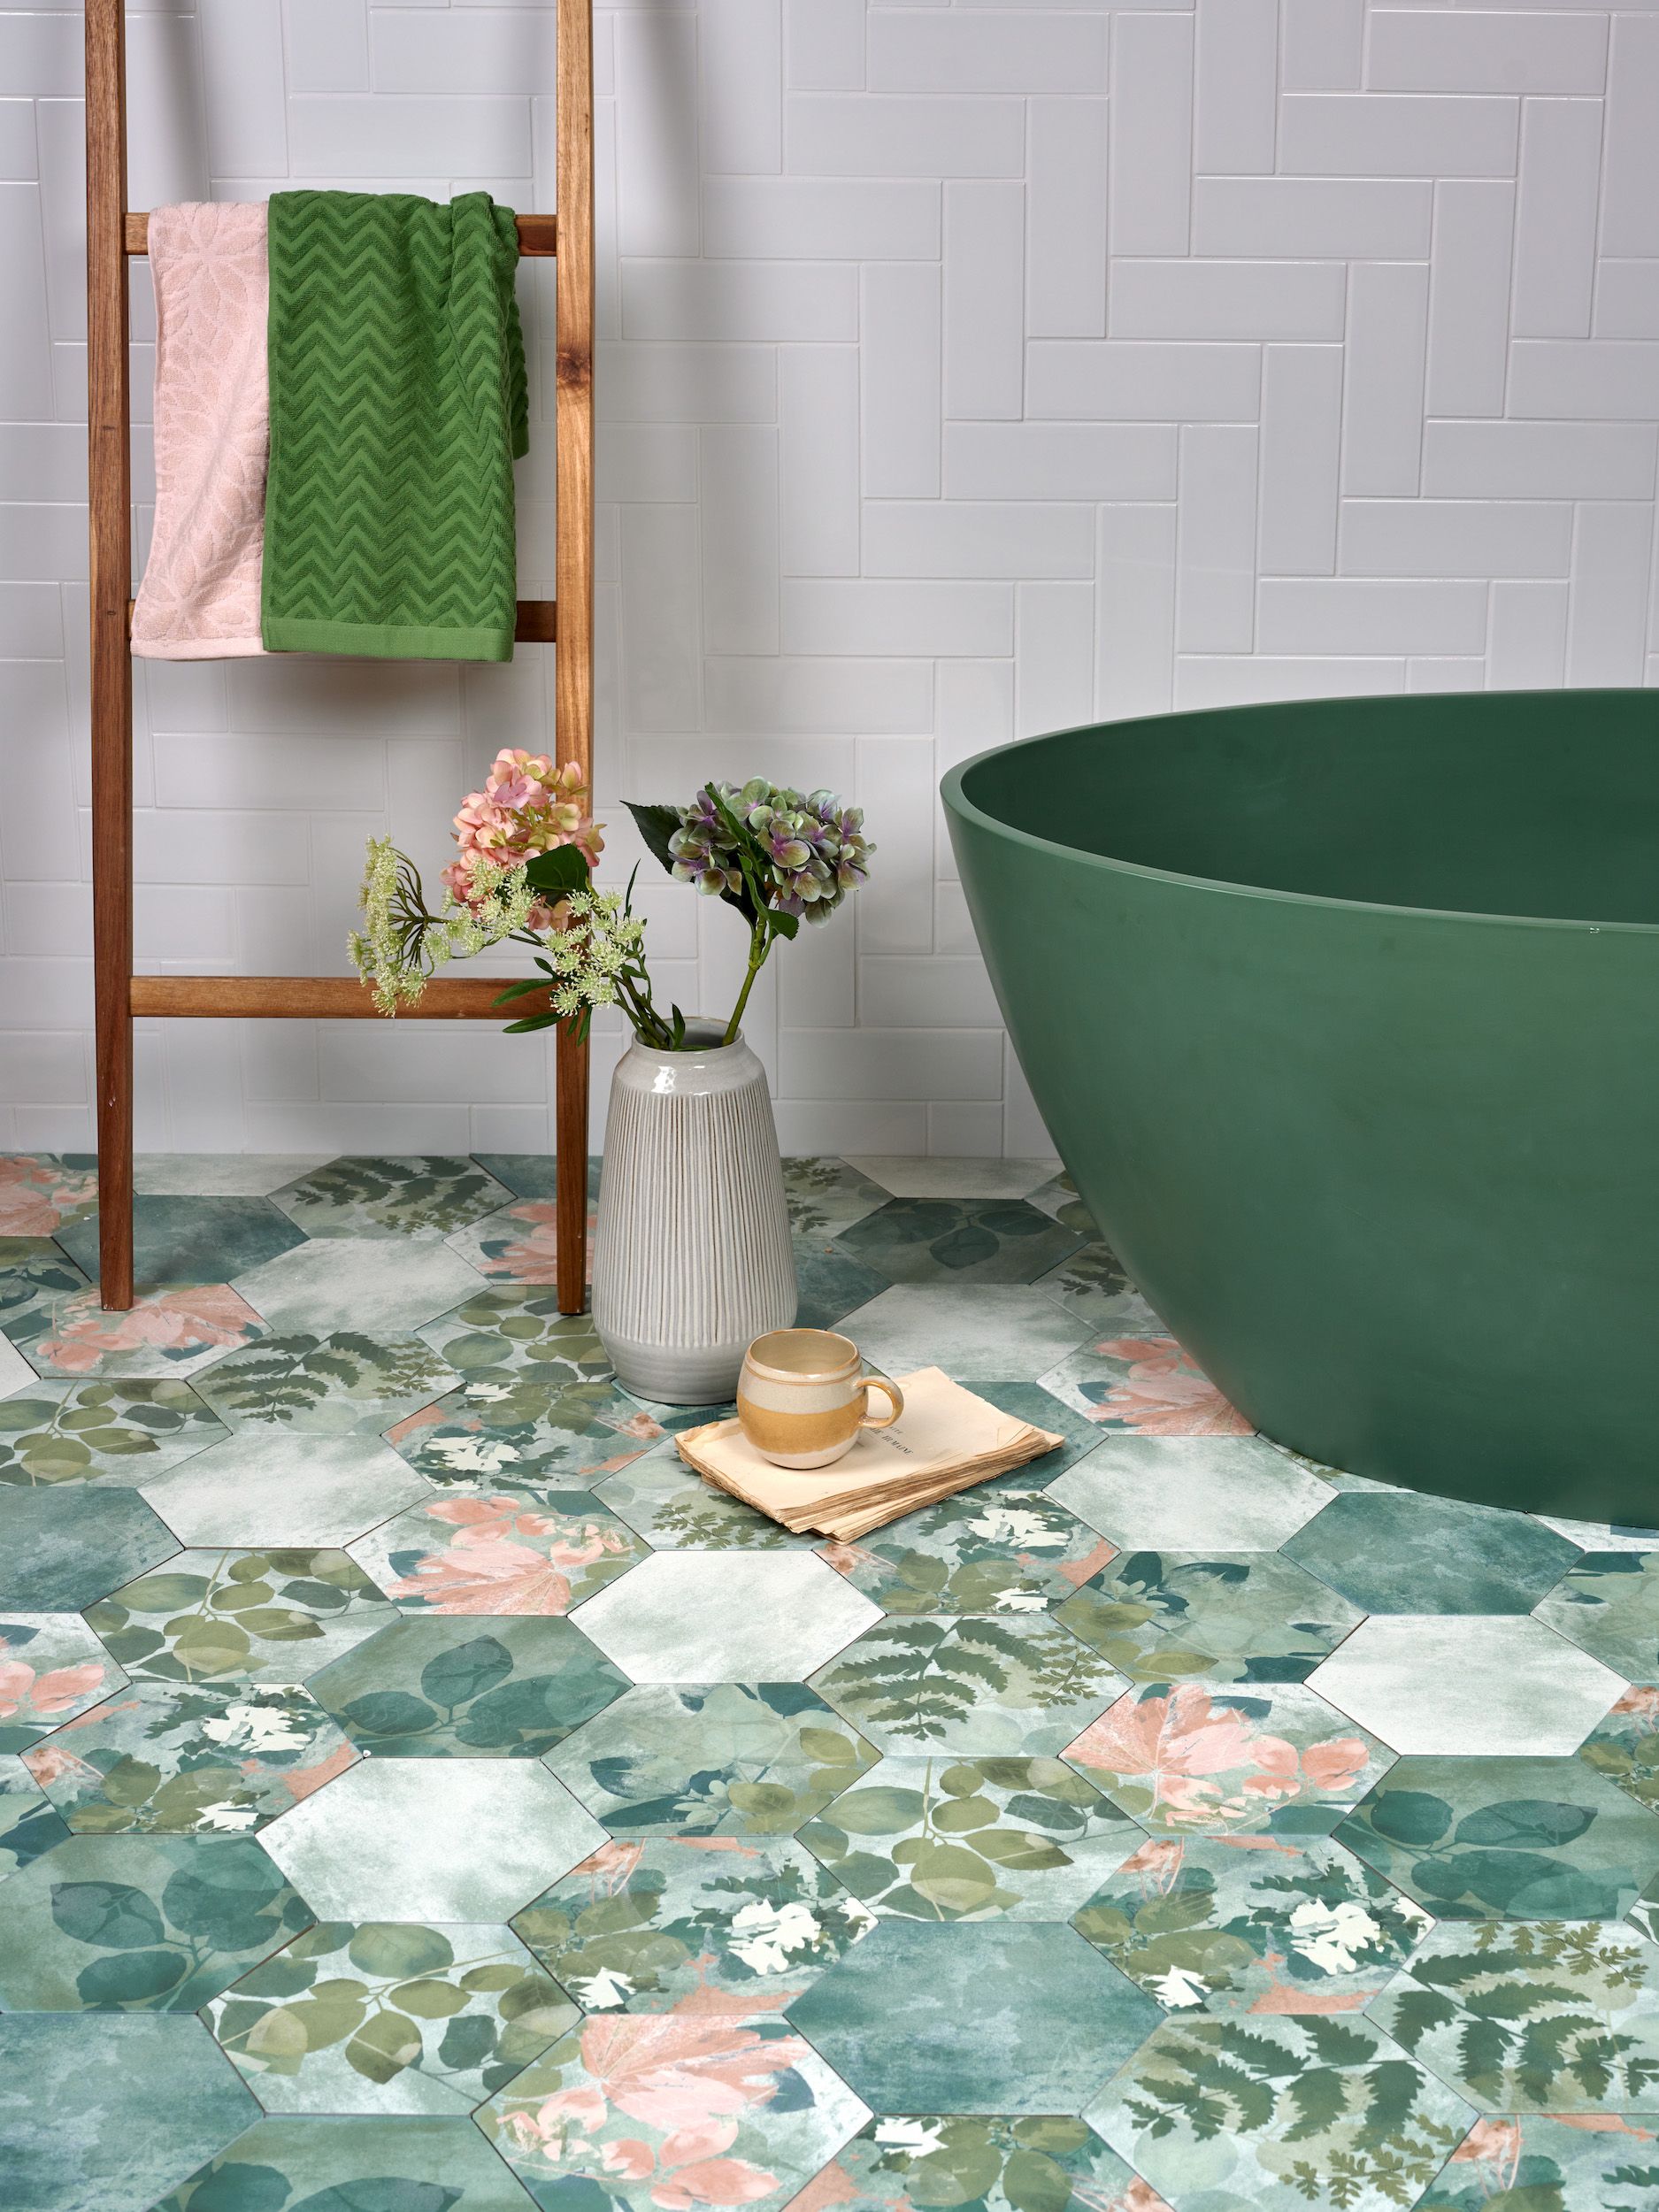 National Trust Tile Collection Inspired By Properties and Gardens